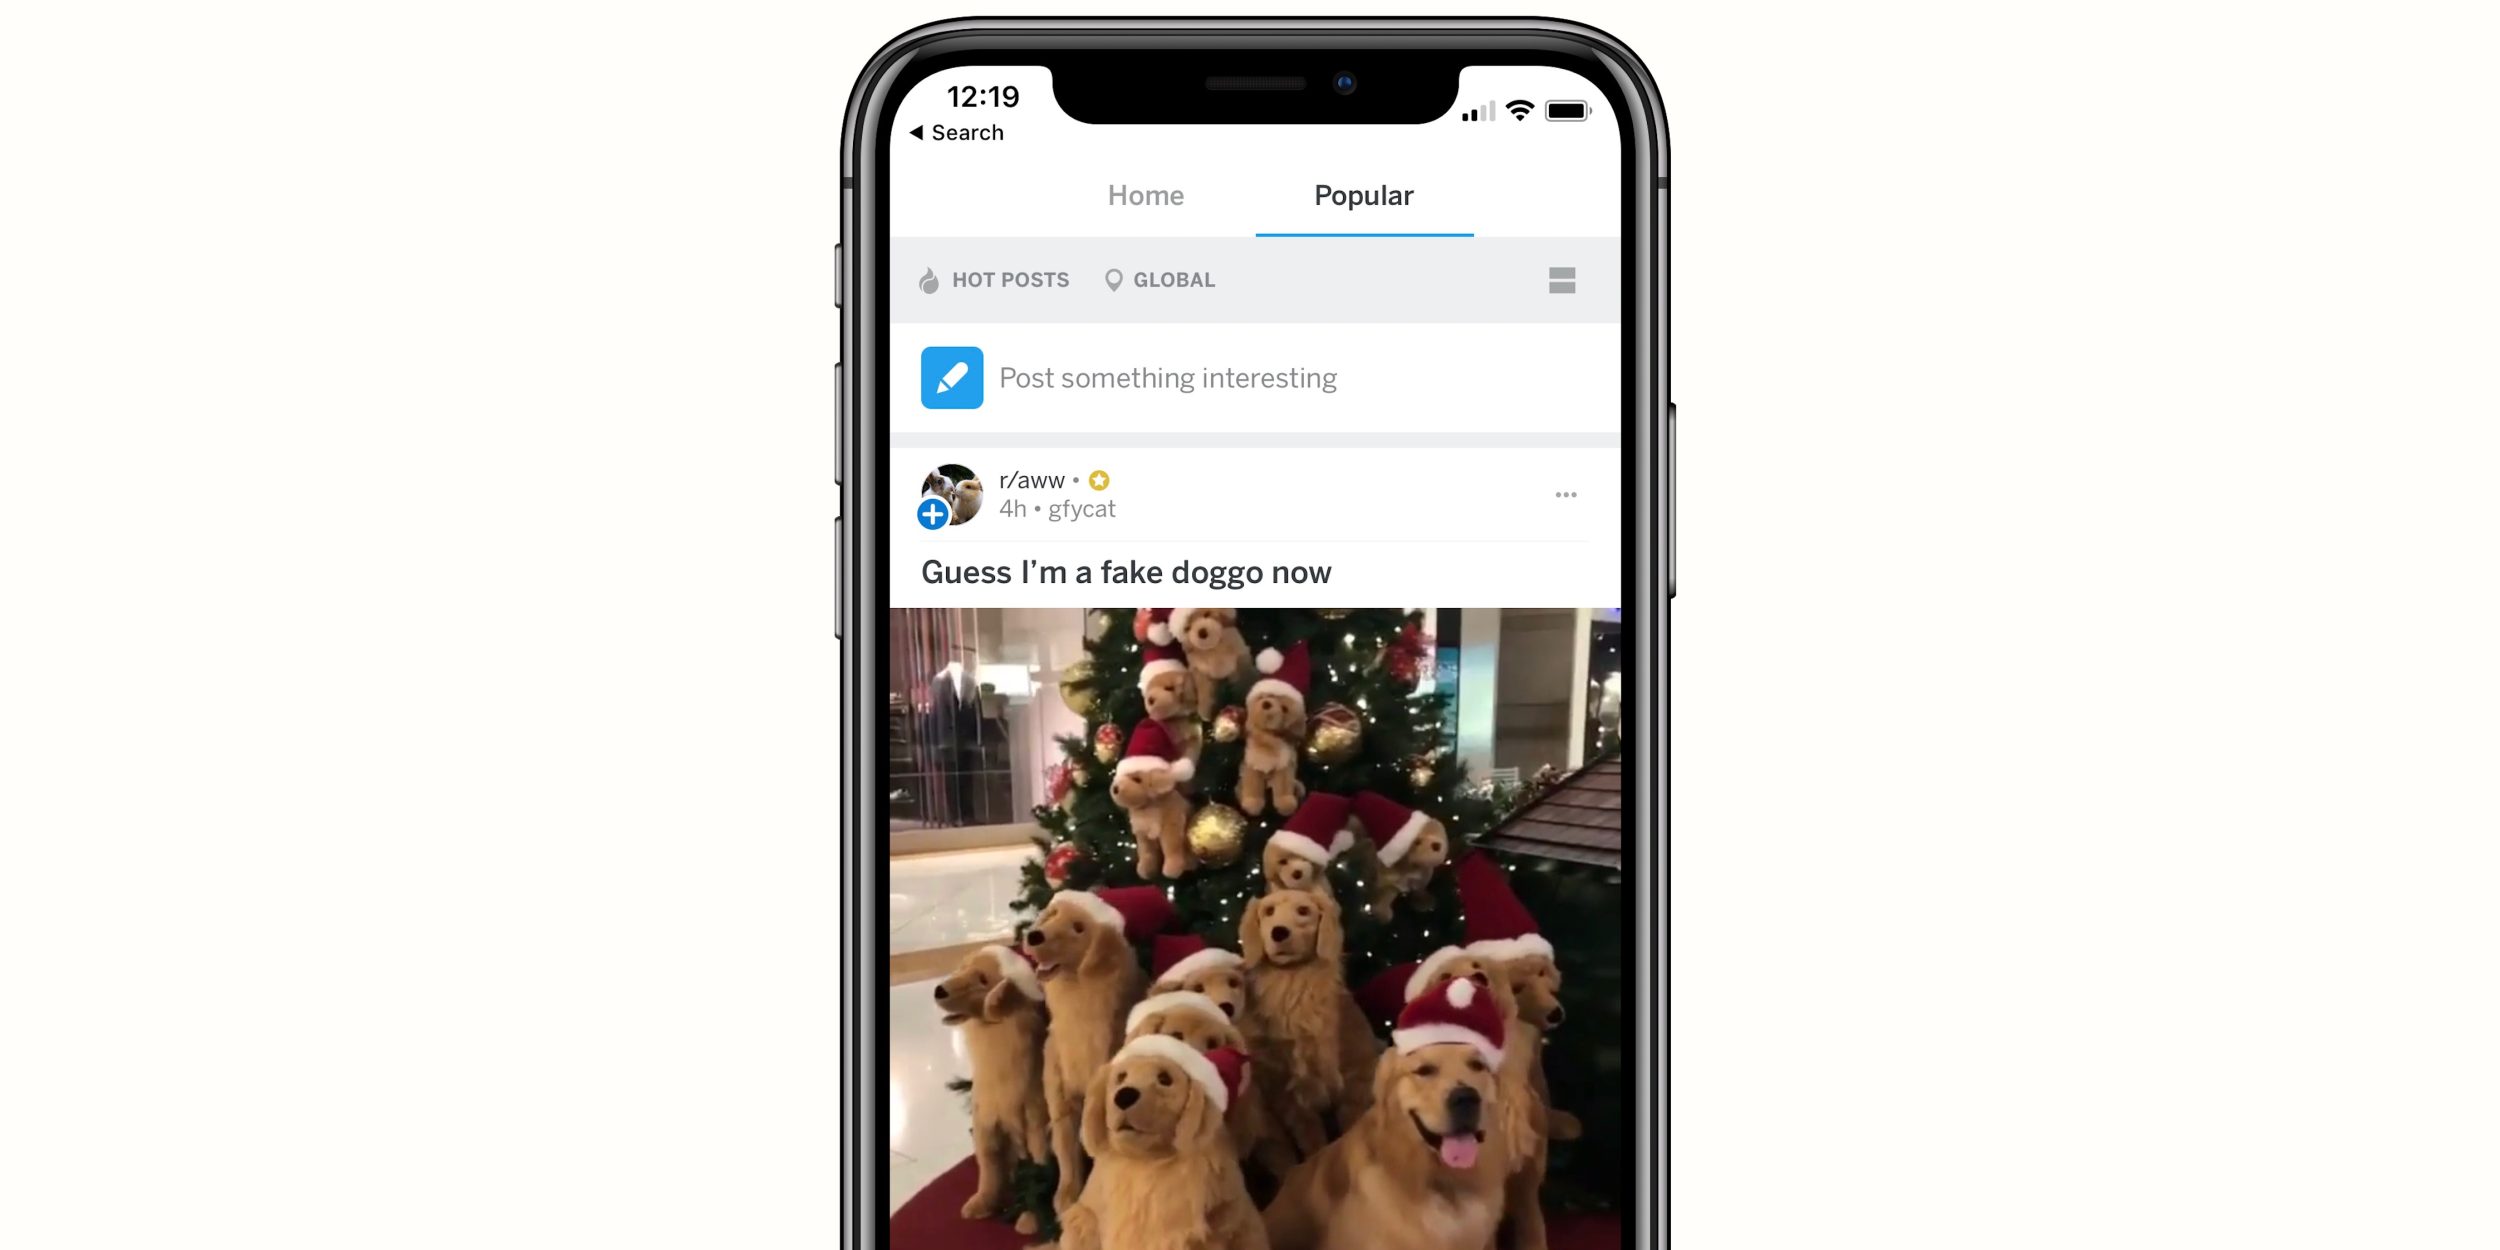 Reddit Introducing Native Promoted ads in its iOS App Starting March 19